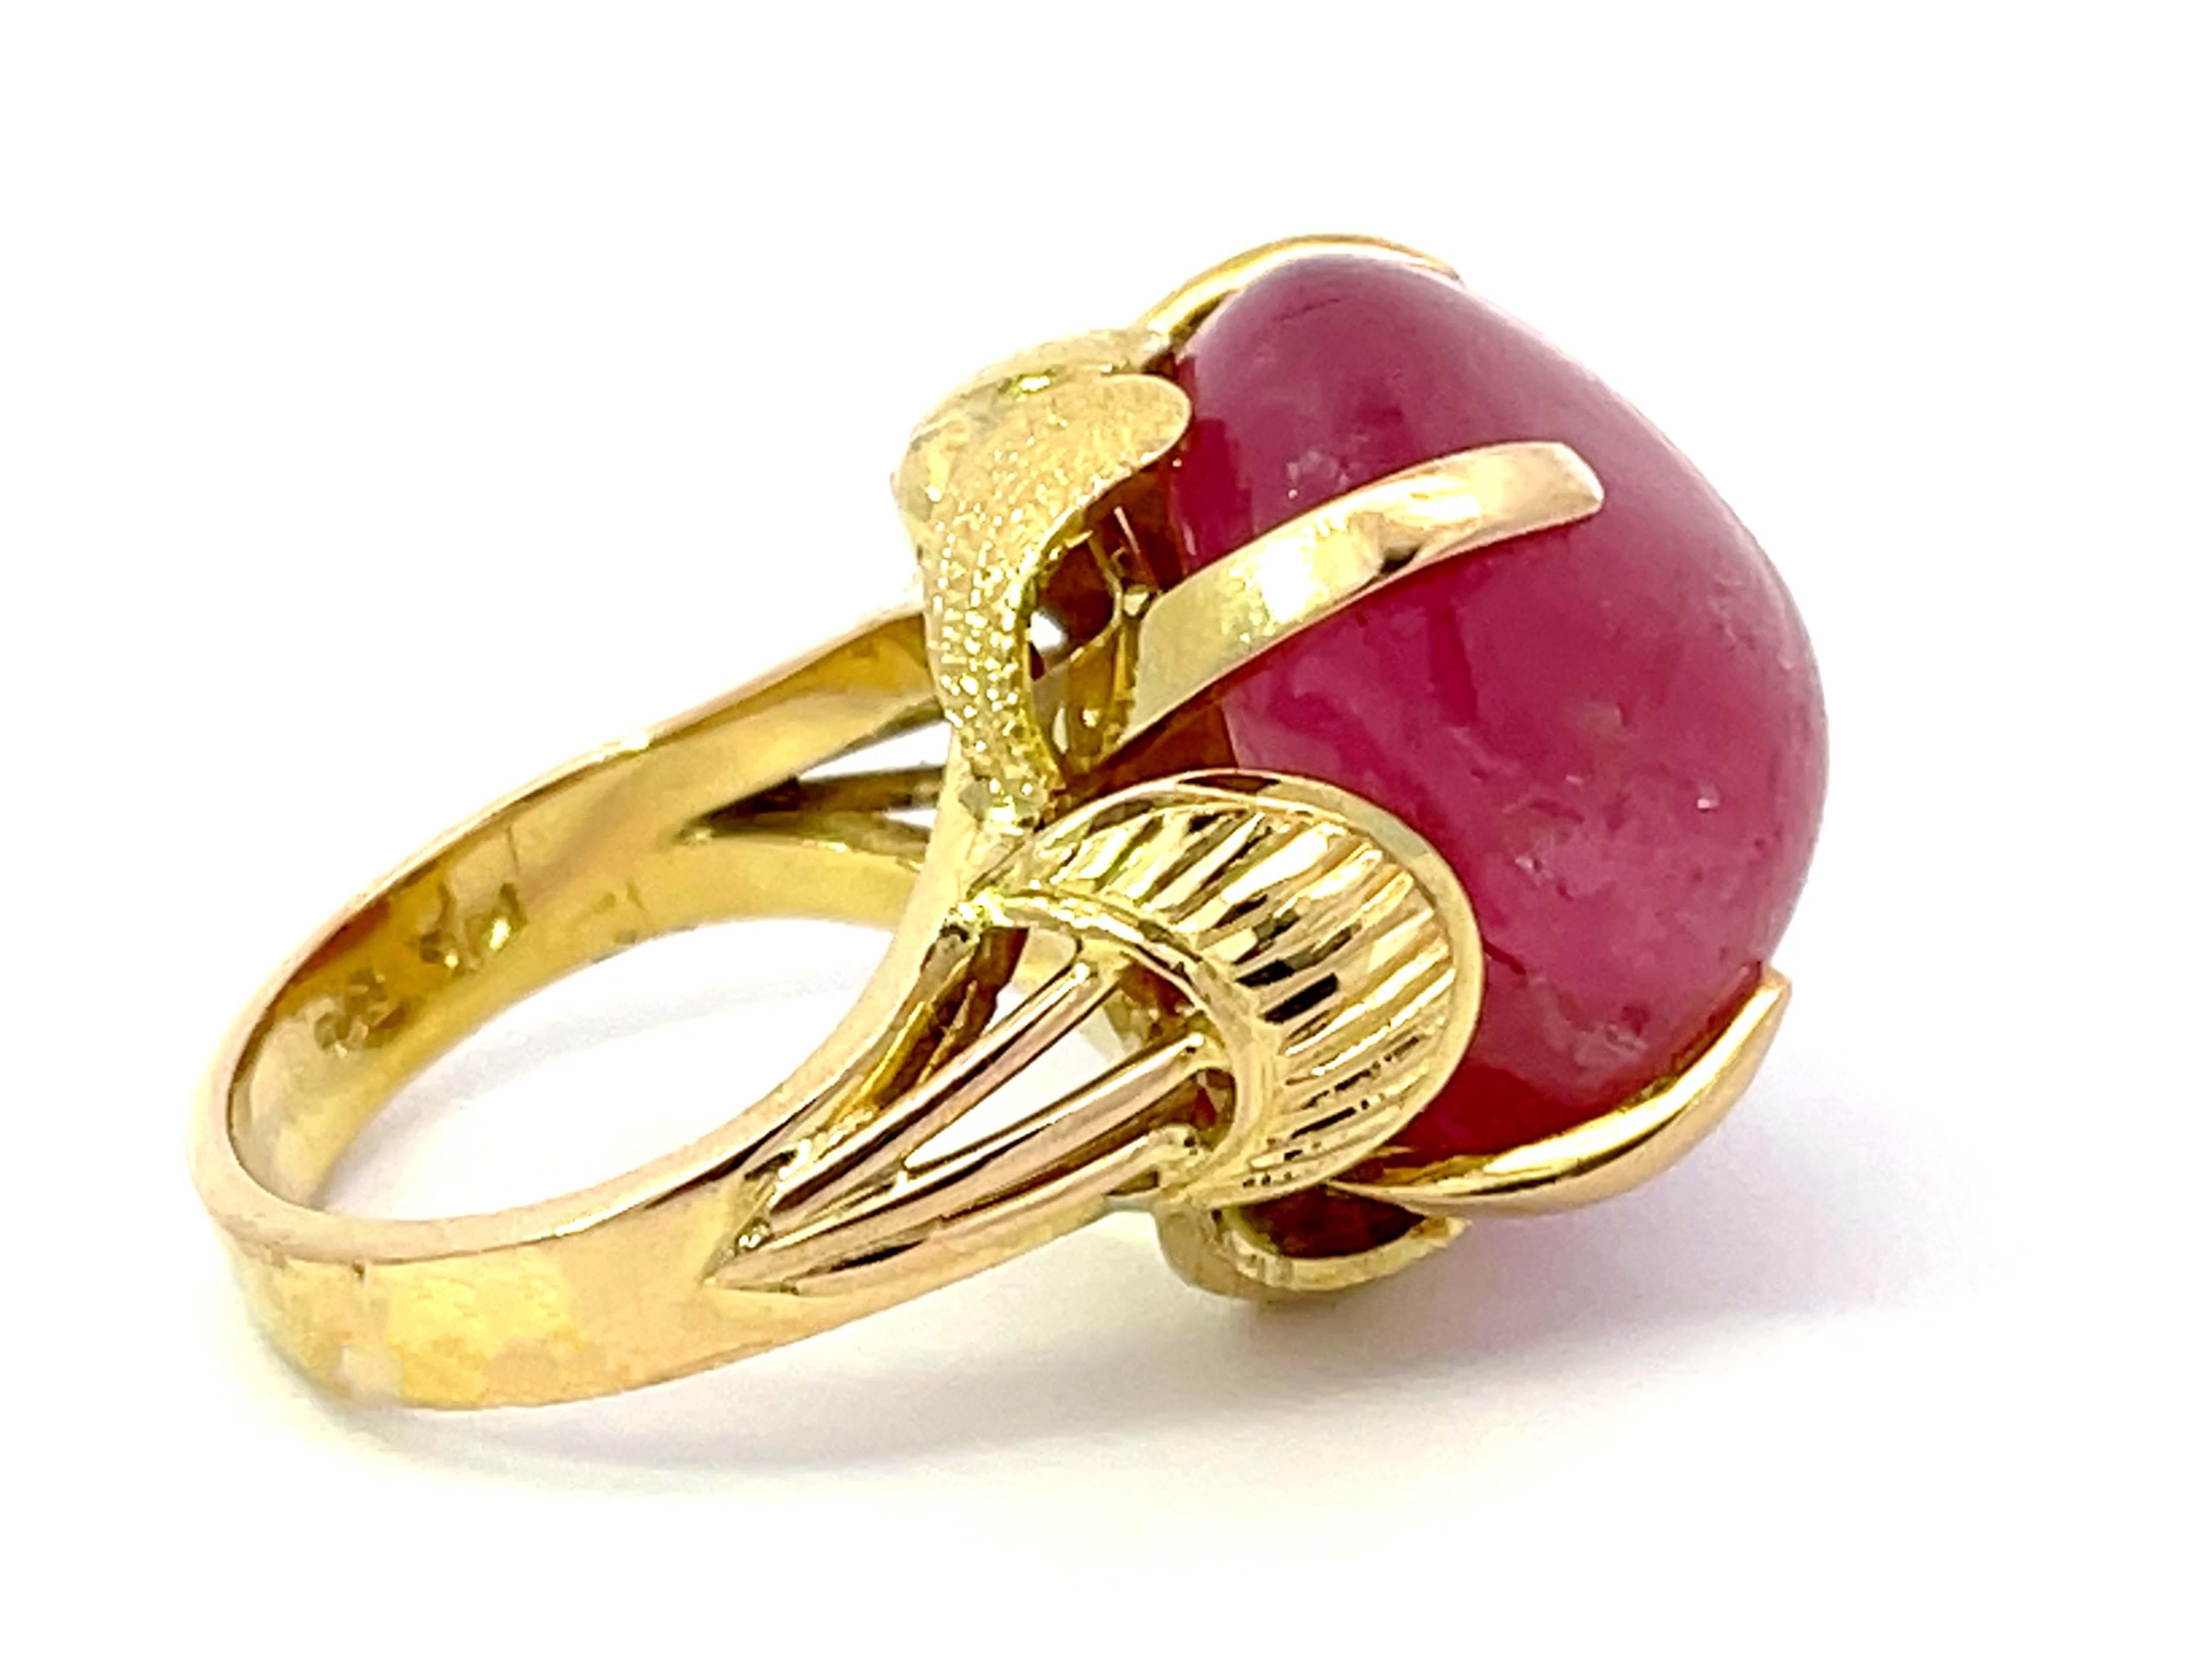 Large Pink Tourmaline Ring 14k Yellow Gold In Excellent Condition For Sale In Honolulu, HI